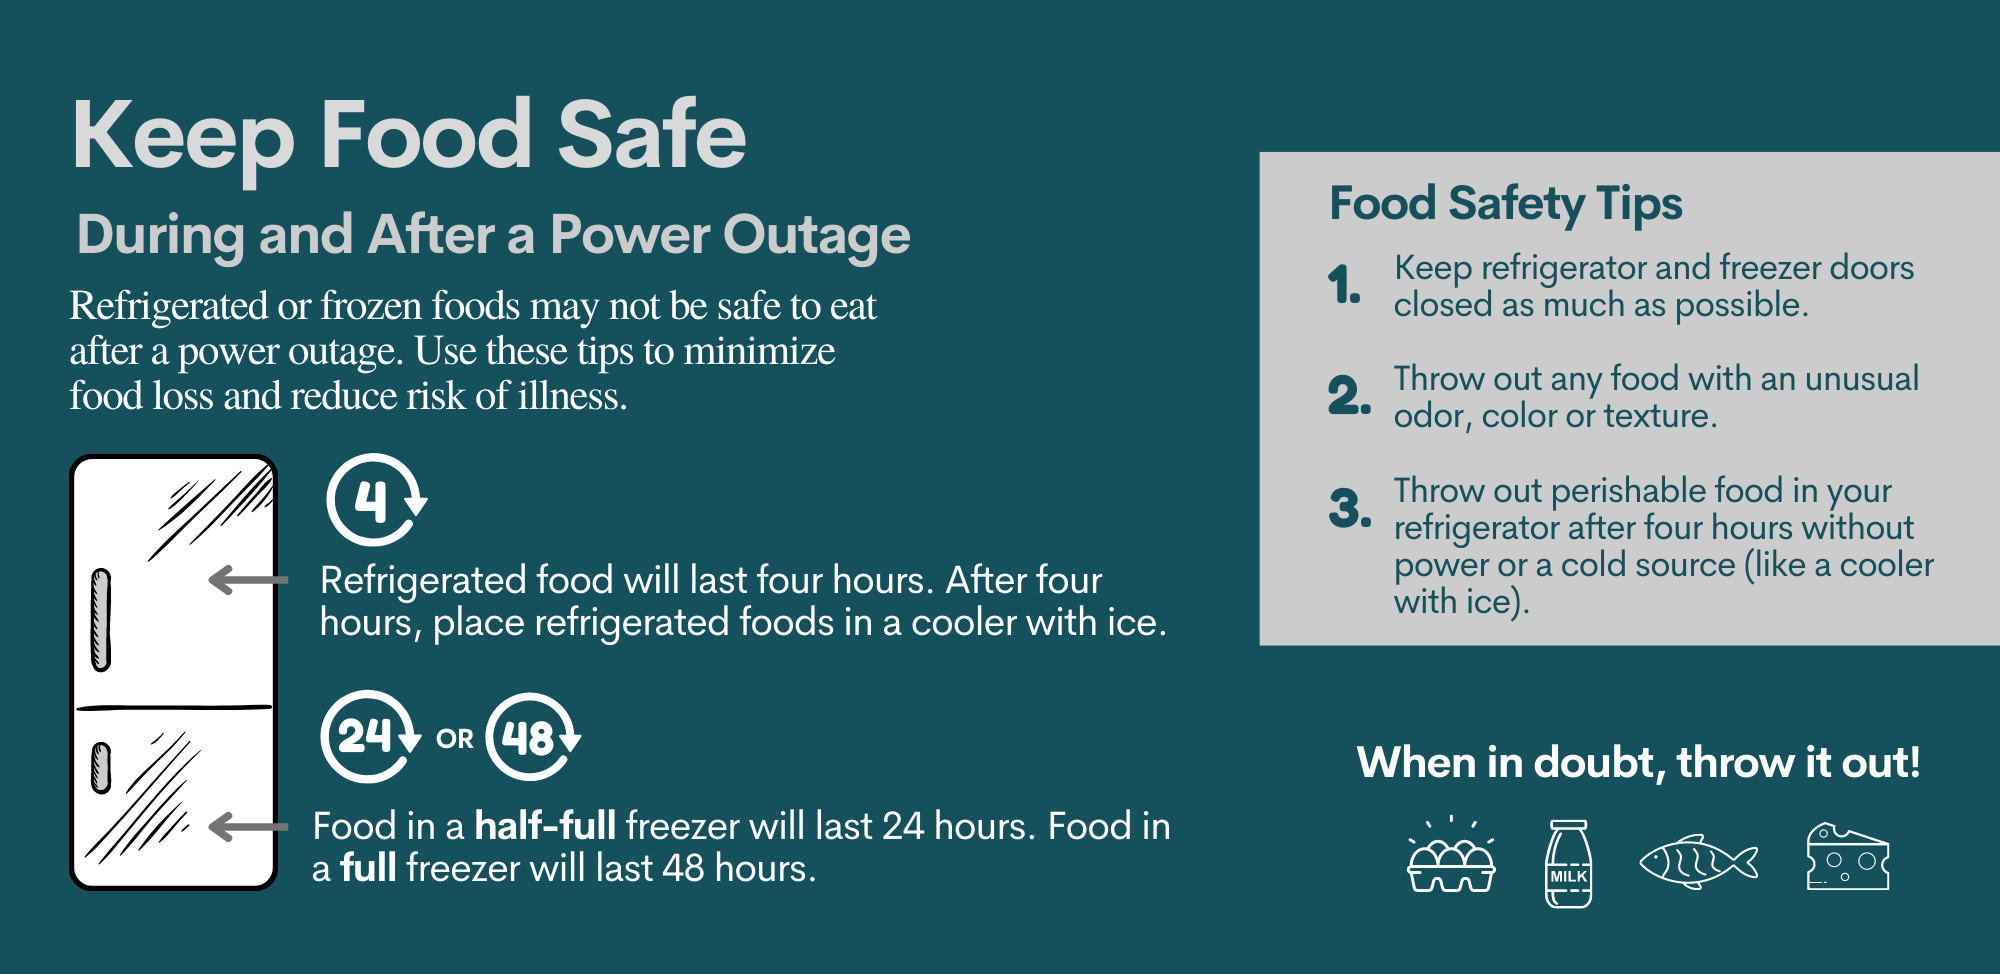 https://joemc.com/wp-content/uploads/2022/08/Food-Safety-During-Power-Outage-.png